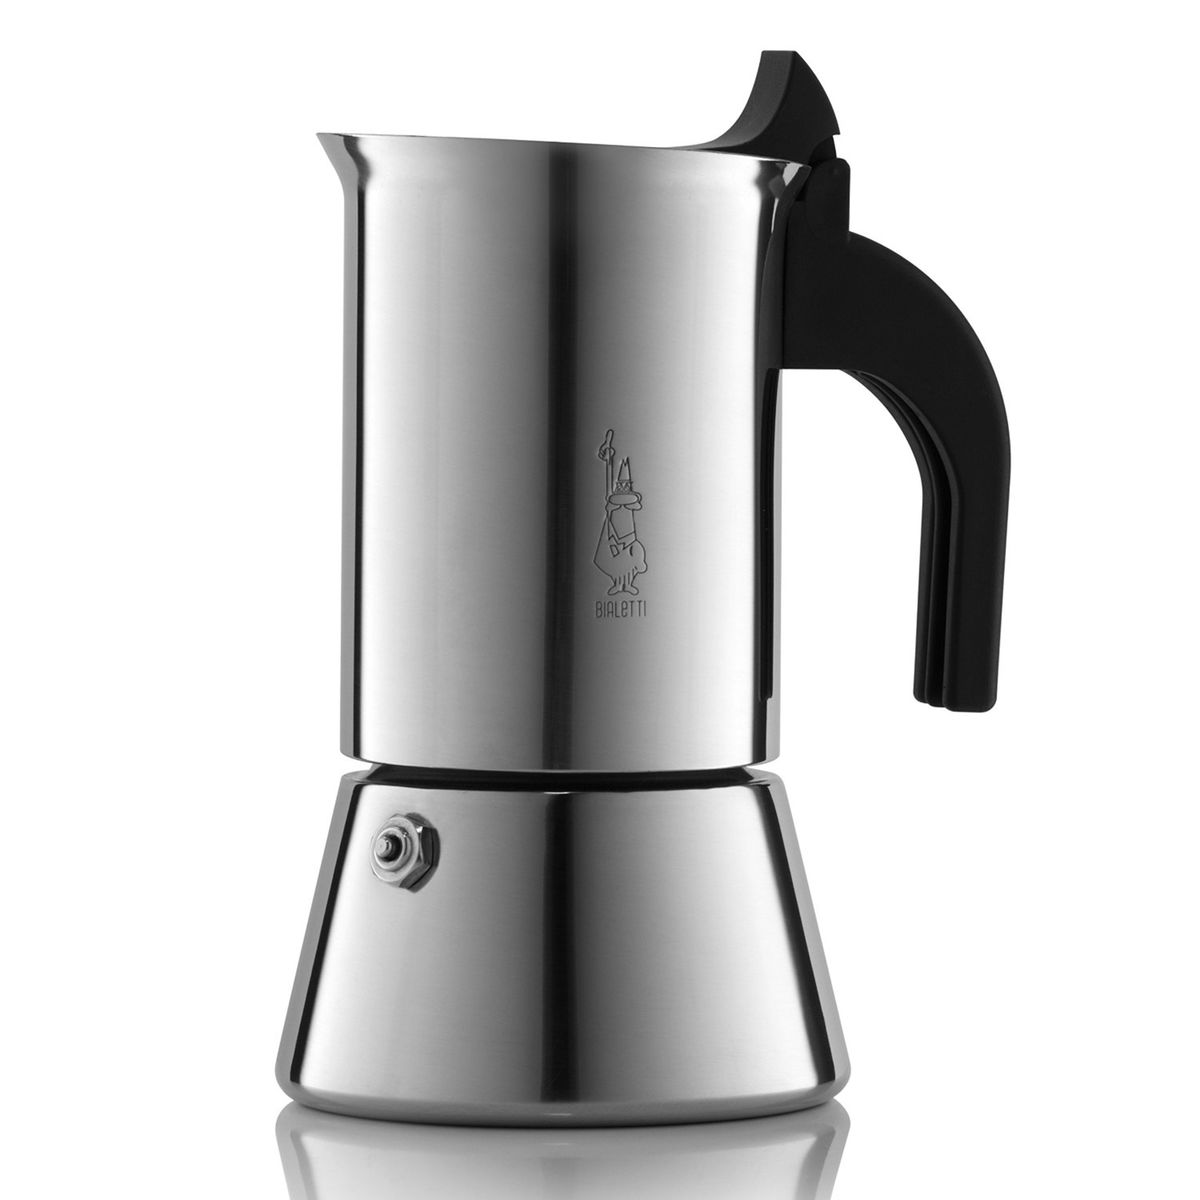 Designed by Guido Bergna, the 4 cup Venus moka pot combines beauty and elegance featuring a sleek, stainless steel design with isolating knob and handle. Can be used on gas and electric stoves and is dishwasher safe.